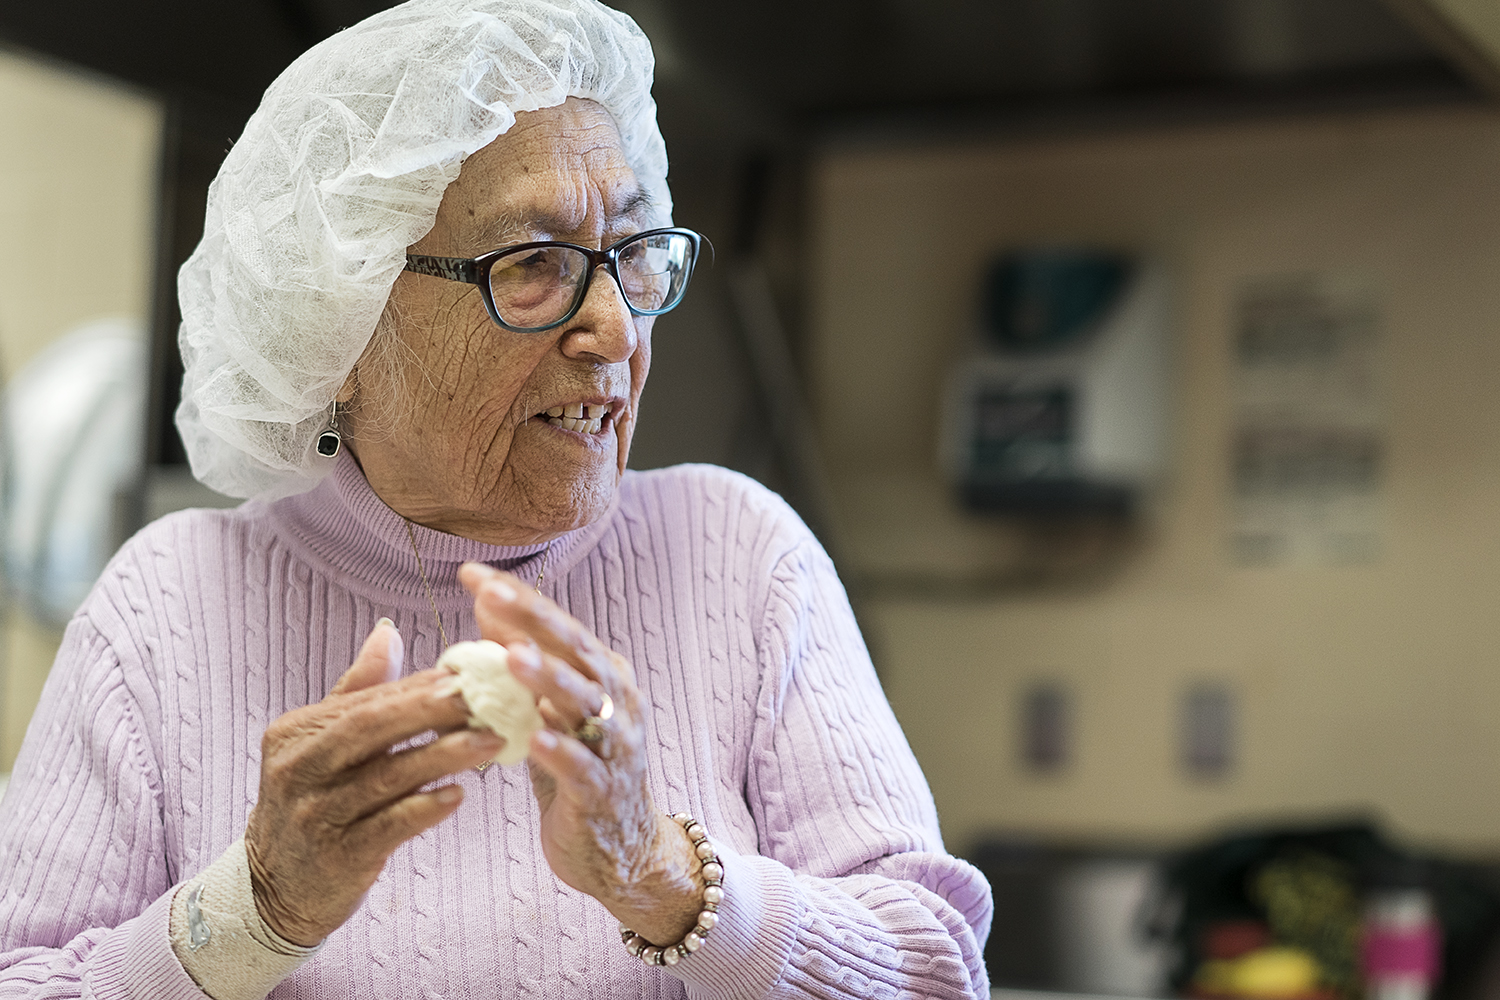 Linda Quintanilla, 90, of Flushing, rolls a small ball of masa between her hands as she chats with the other women making tortillas in the kitchen at the San Juan Diego Activity Center.